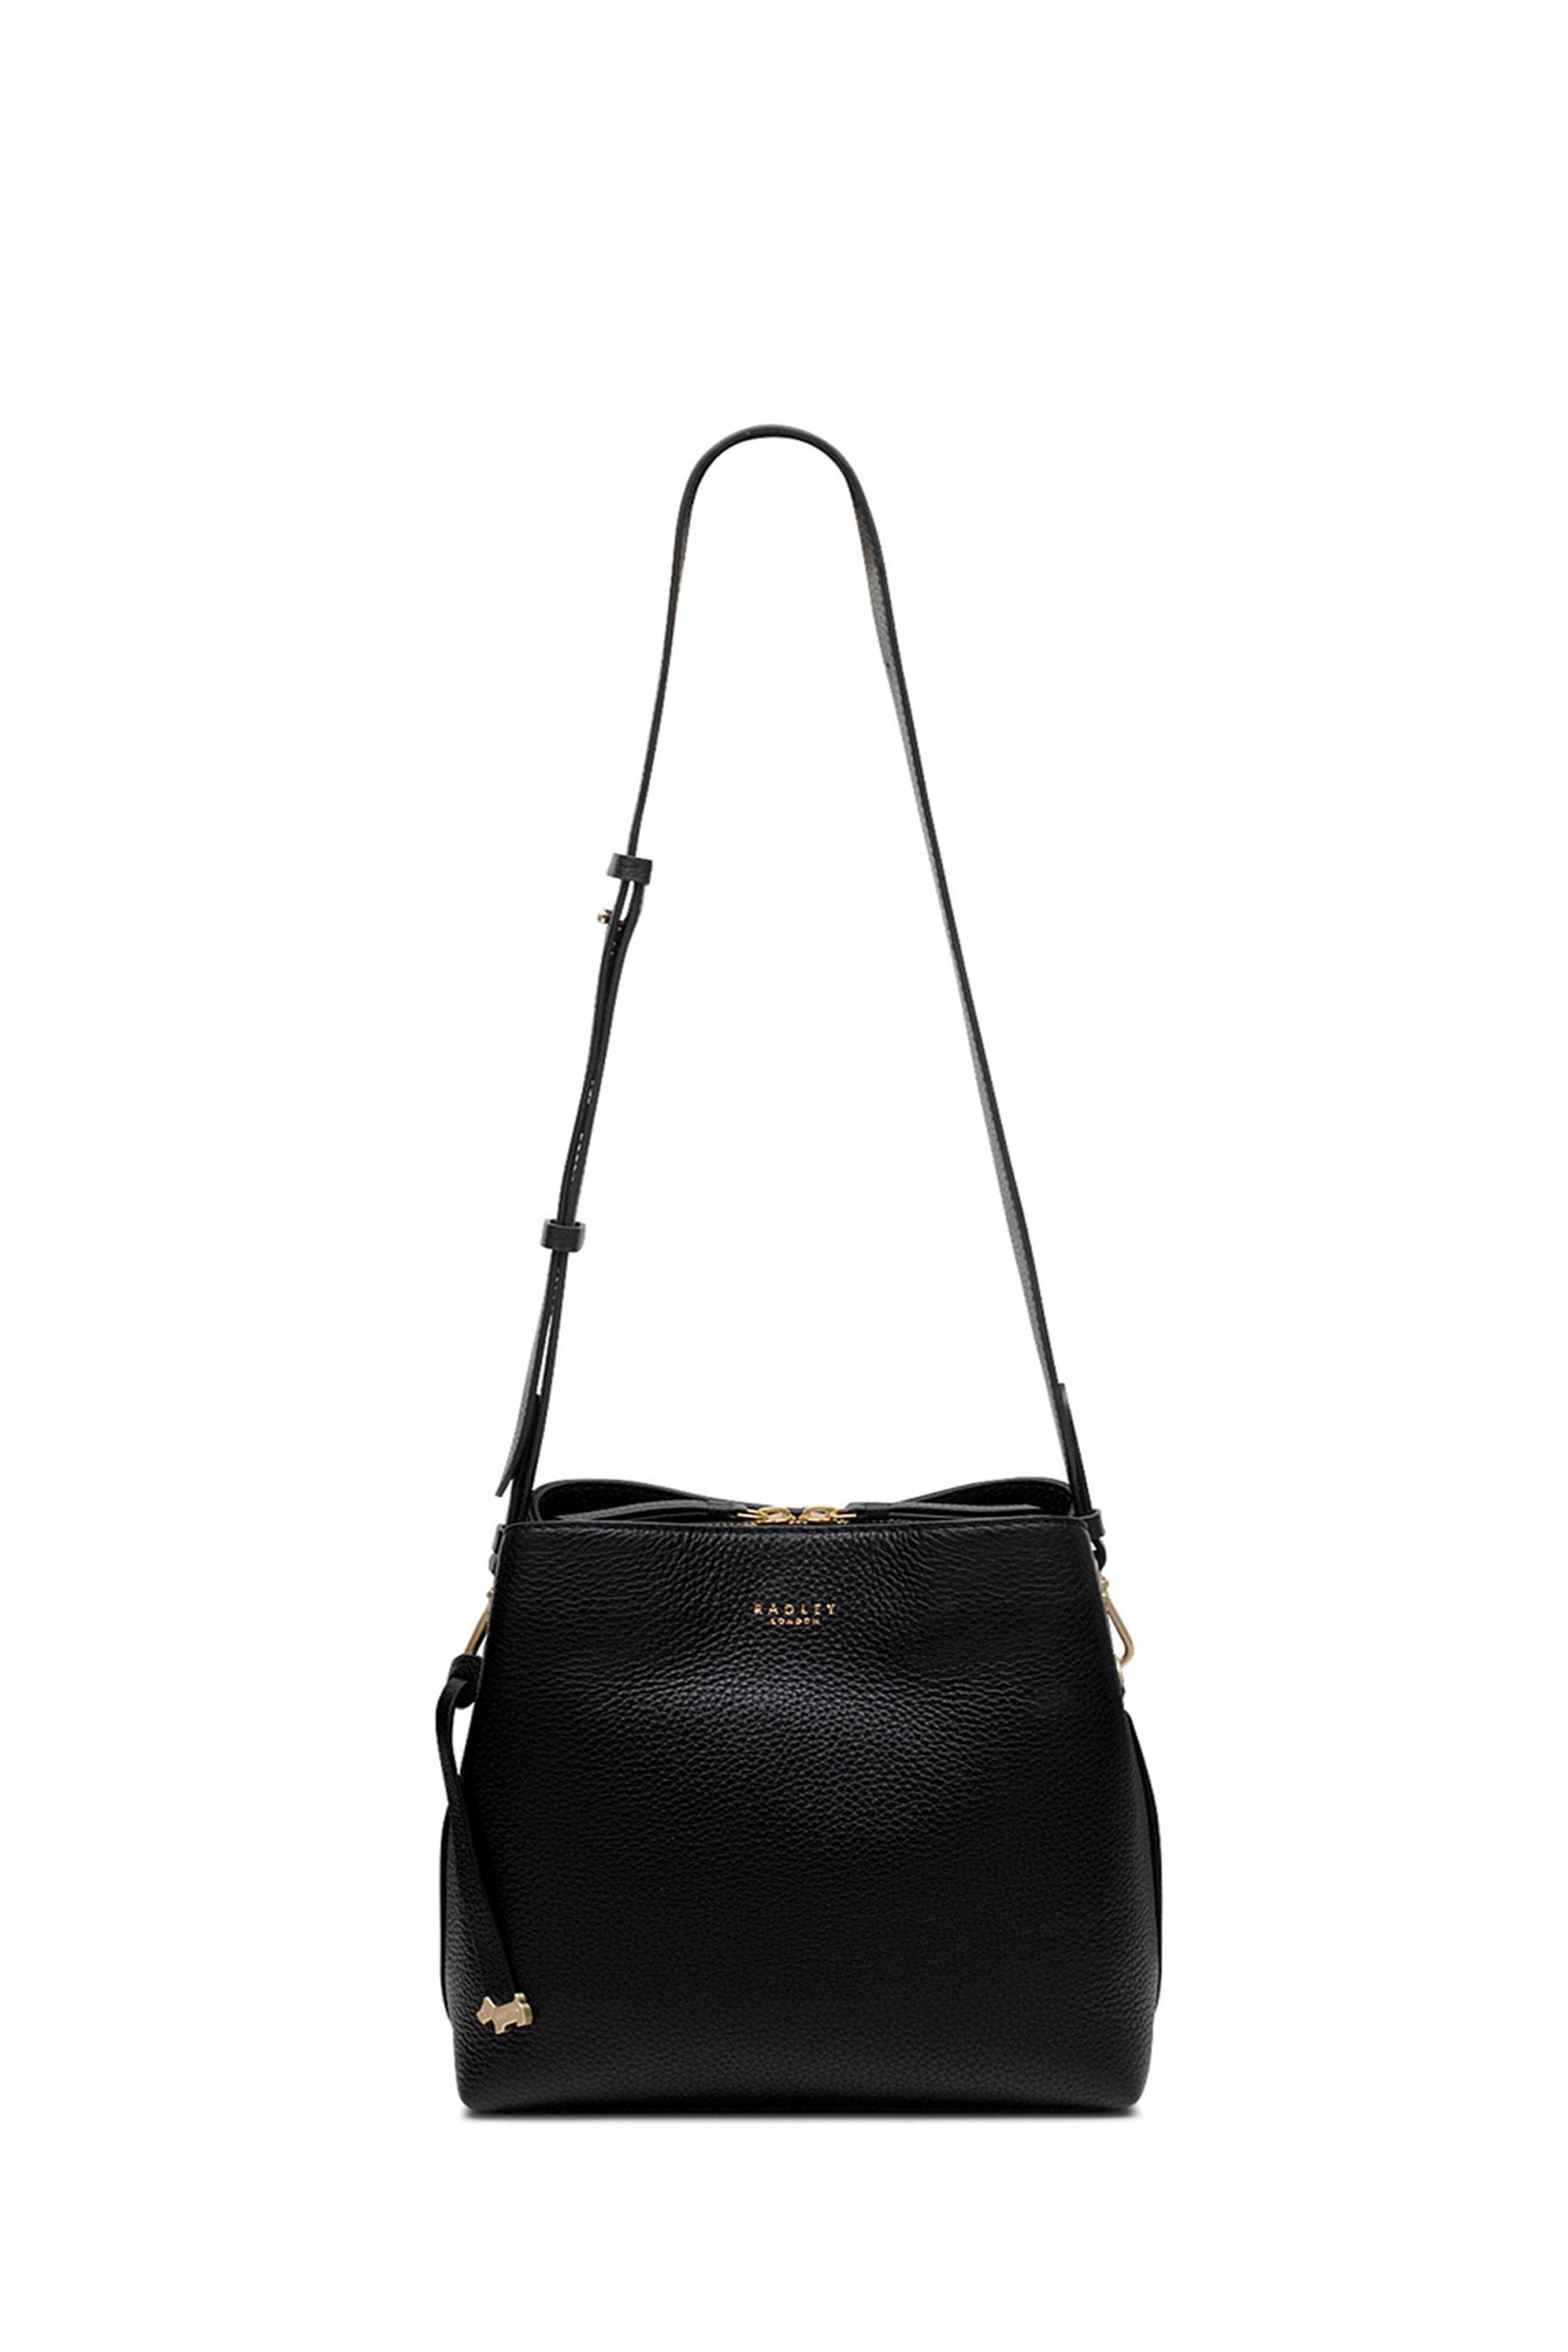 Buy Radley London Medium Dukes Place Compartment Cross-Body Bag from ...